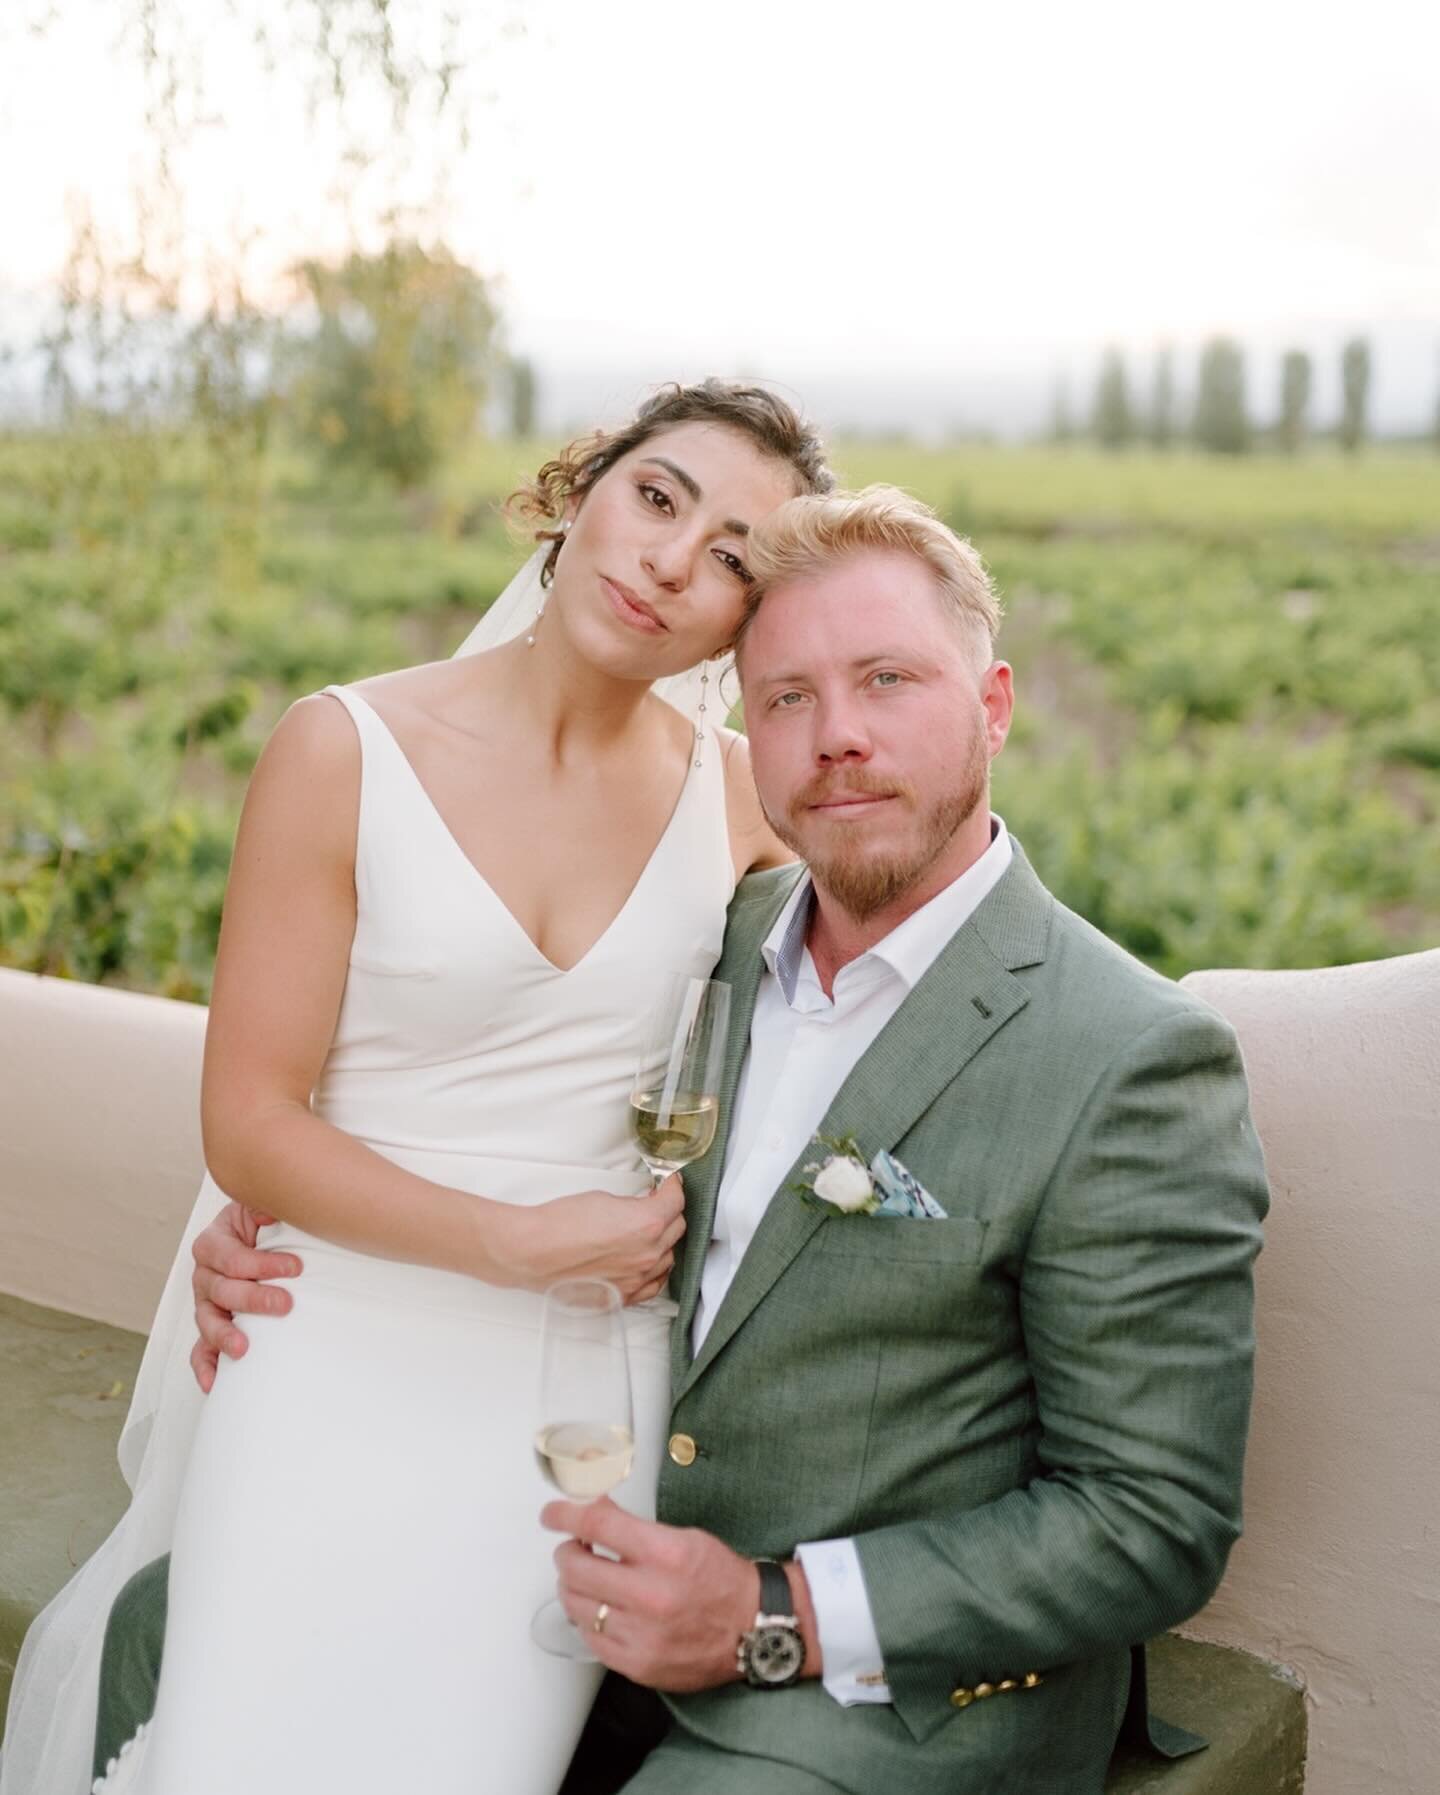 Elopement Wedding in @cavaswinelodge 
WP: @maruandersonevents 

They are Melissa &amp; Dannie

Life is only moments
Sharing such unique moments with your true love and loved ones by your side makes human connection and shared moments so magical.

Her